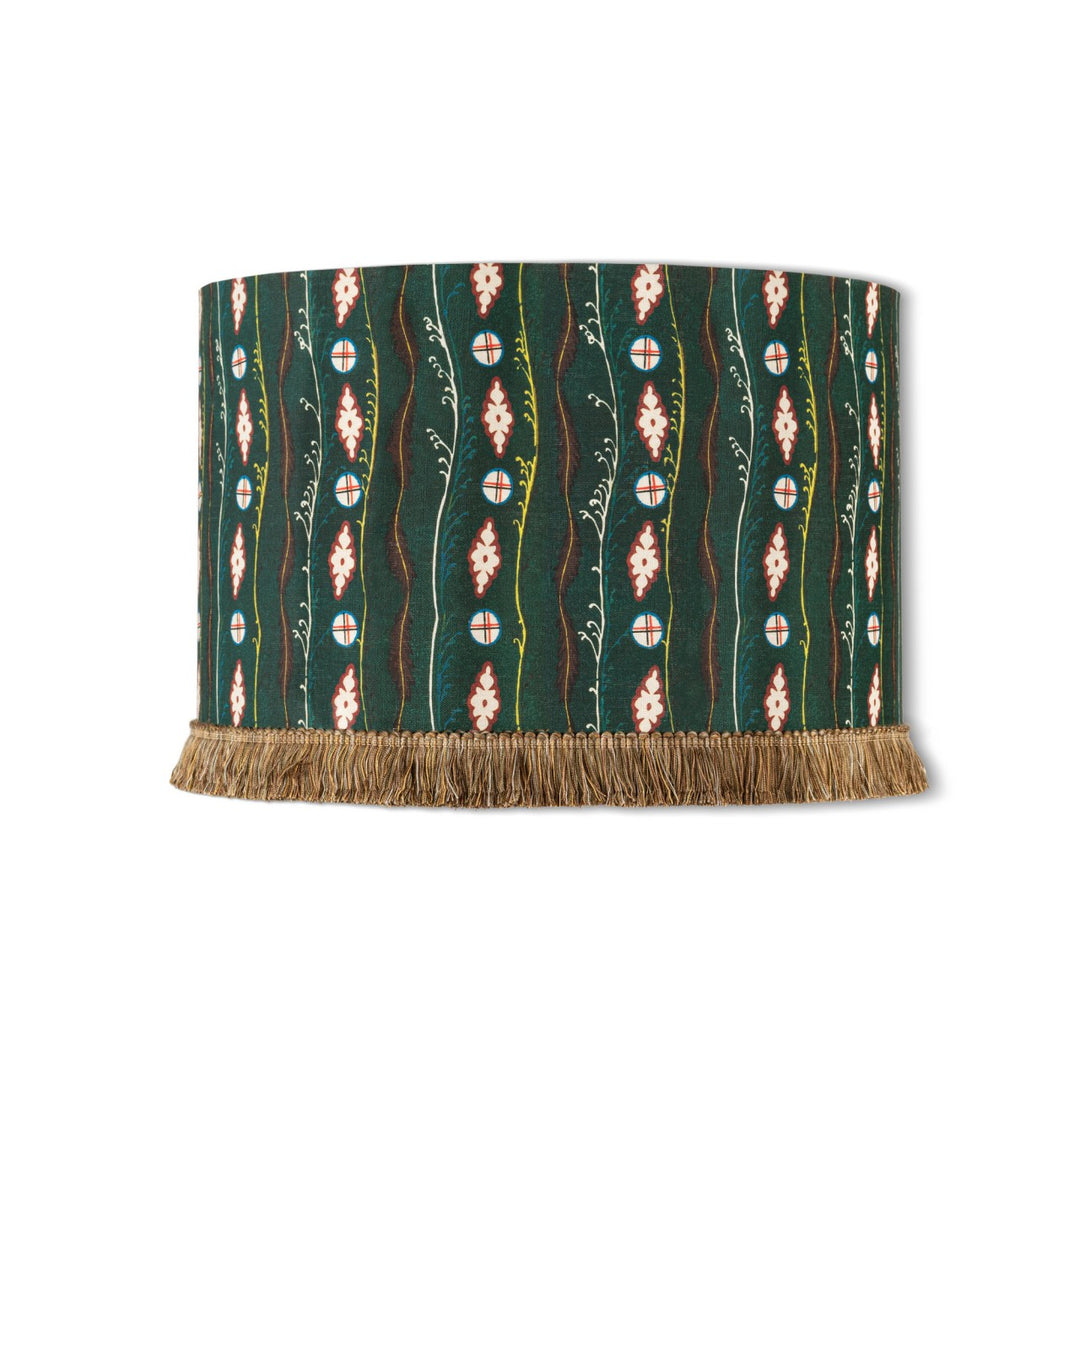 mind-the-gap-tyrol-collection-printed-linen-standard-lam-lampshade-table-lamp-tyrolean-pattern-fringed-edge-lampshade-green-printed-blockprint-style-shade-diamonds-alpine-chalet-decor